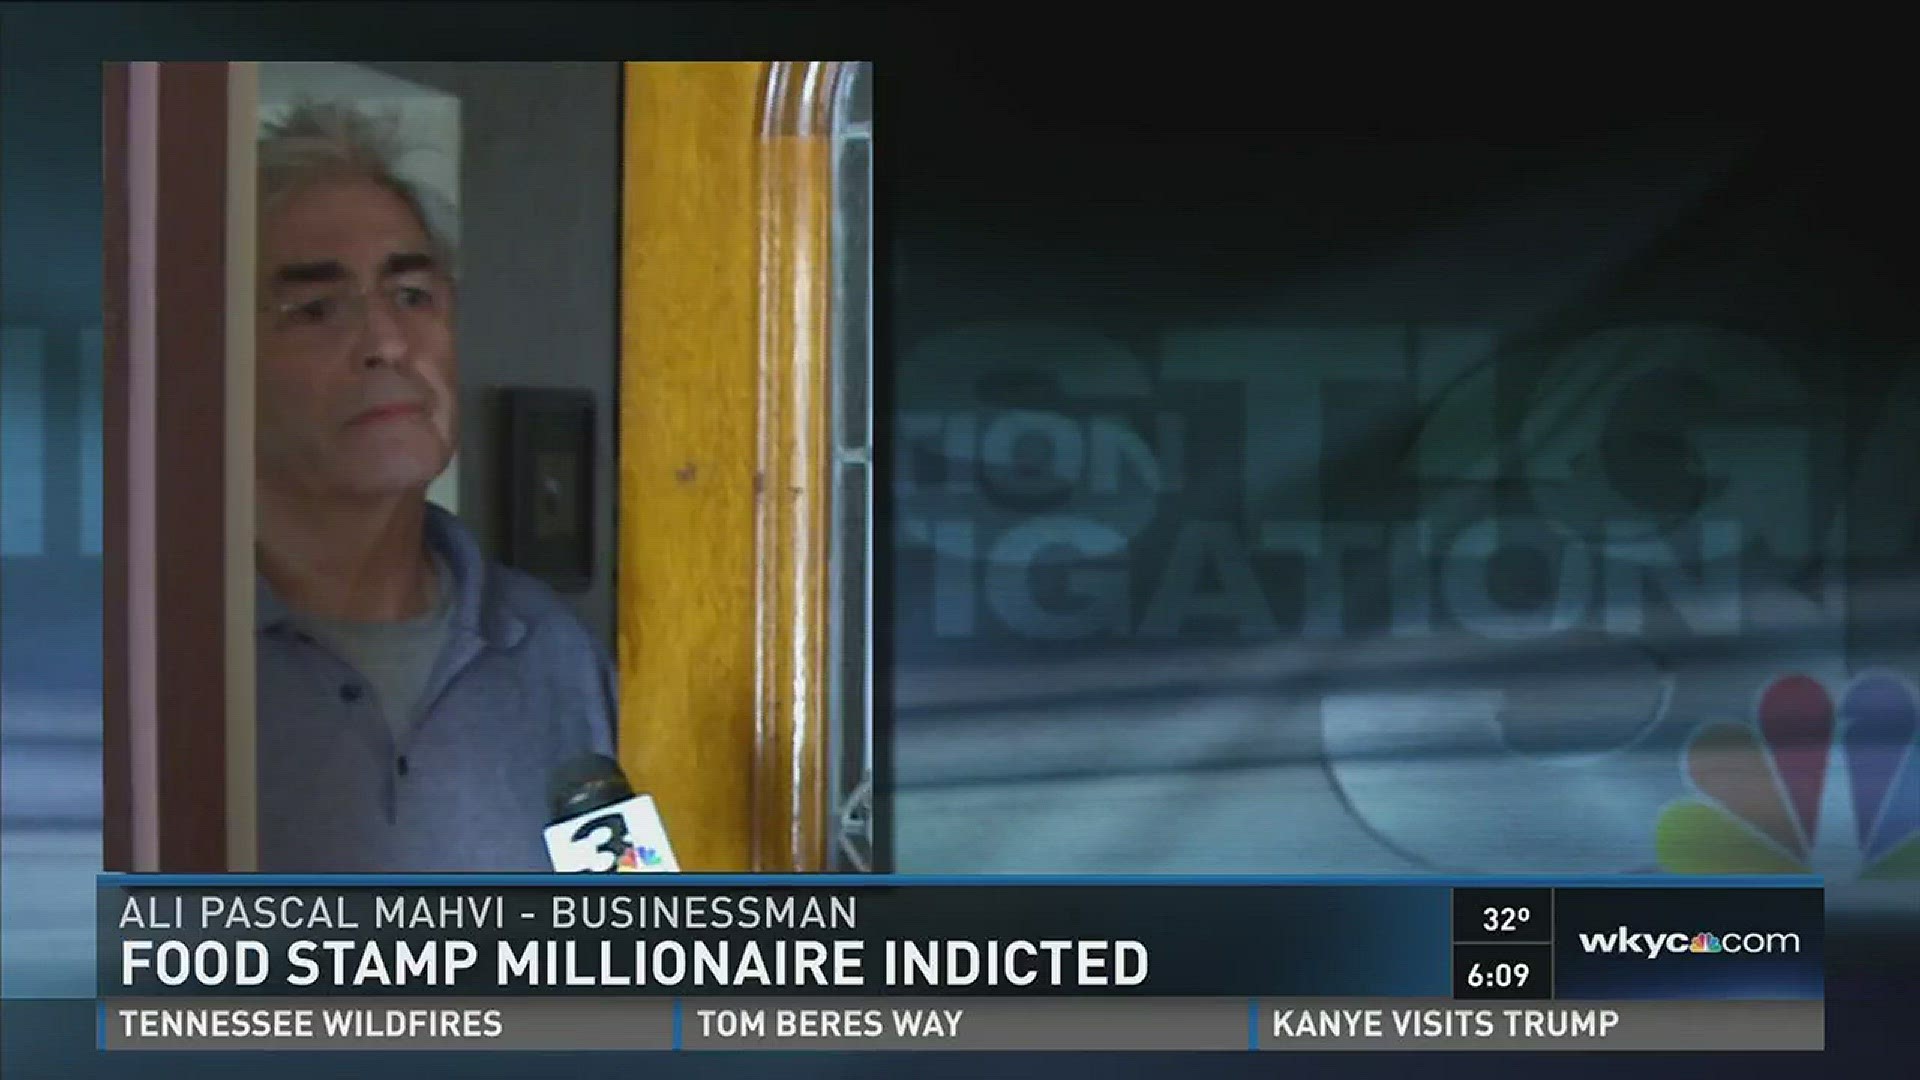 Food stamp millionaire indicted